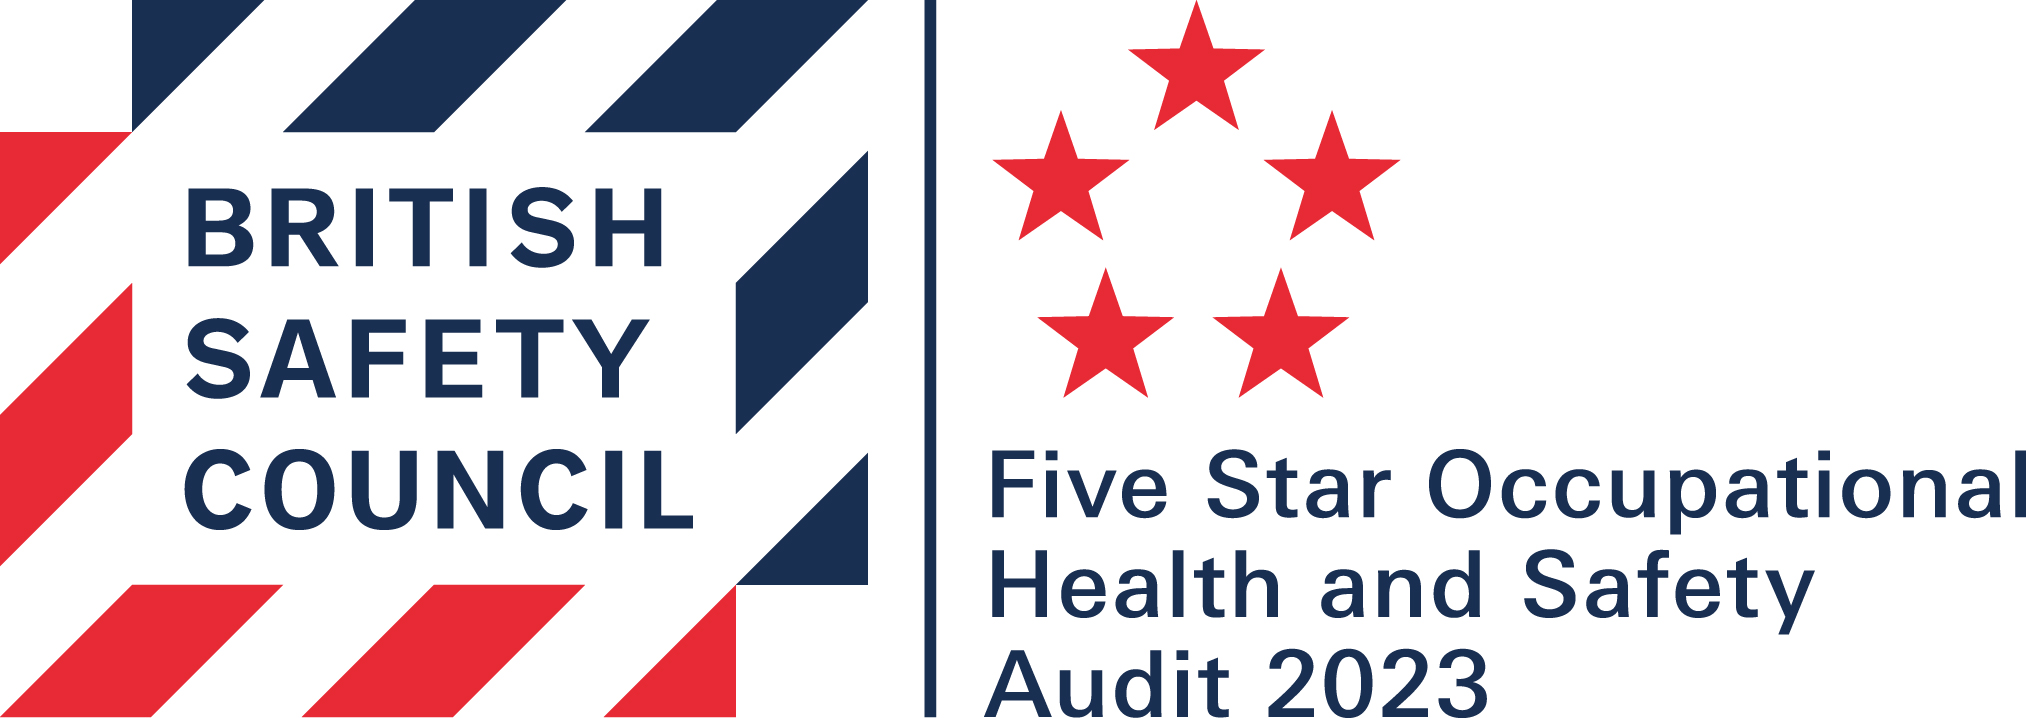 BSC 5 Star Rating Campus- Occupational Health and Safety Audit